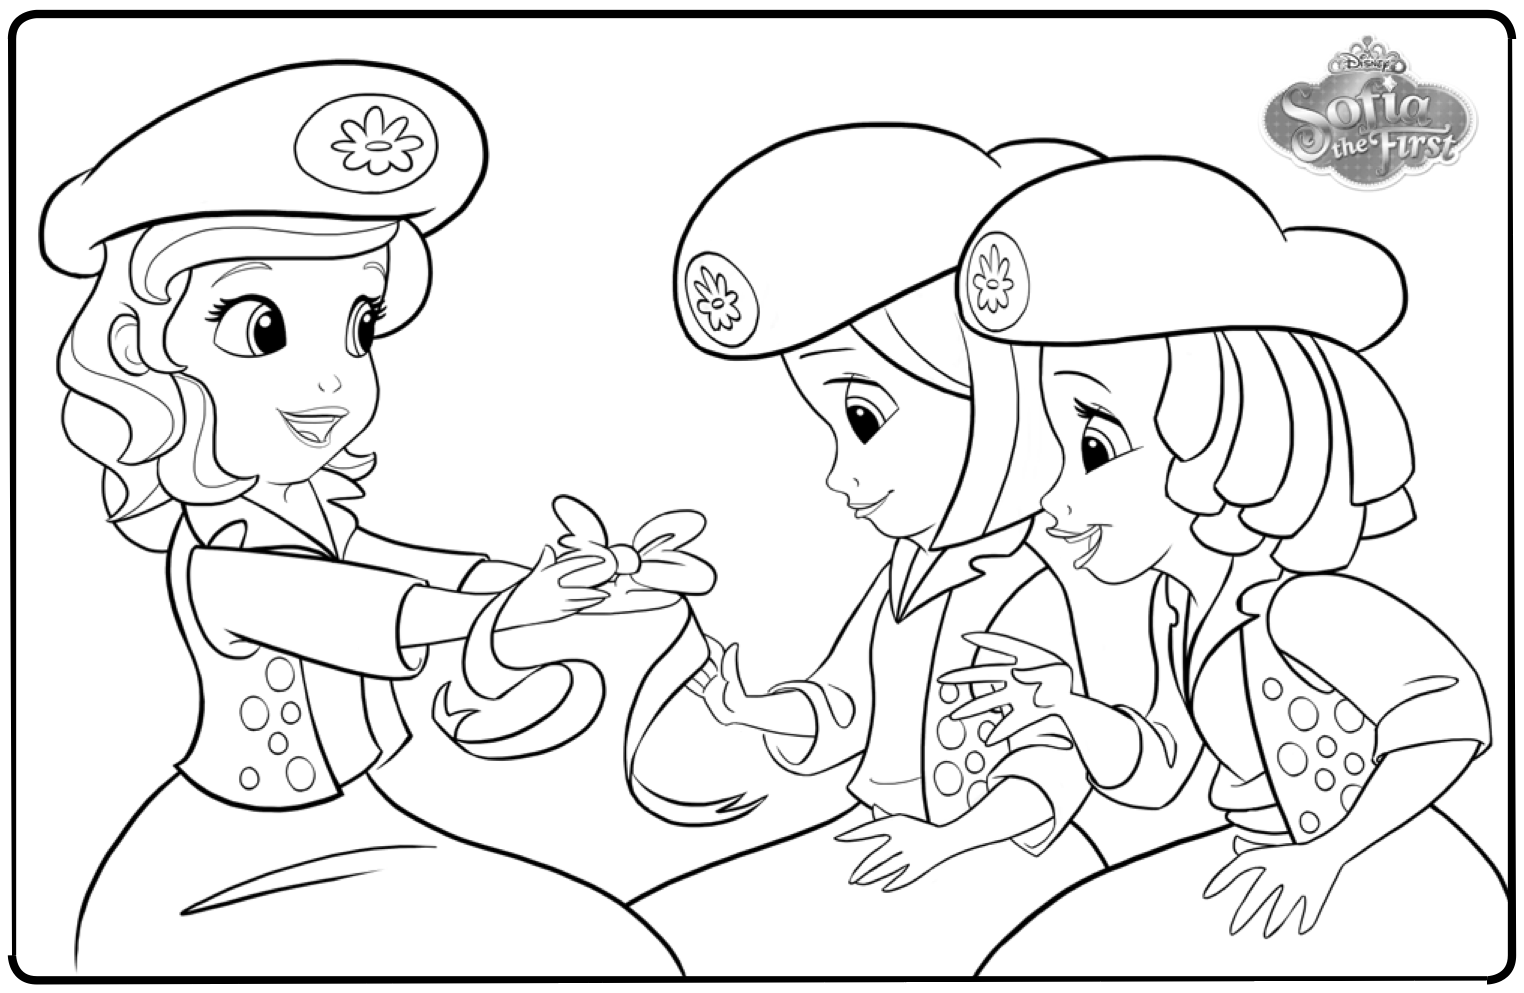 Free Coloring Pages Disney Jr, Download Free Coloring Pages Disney Jr